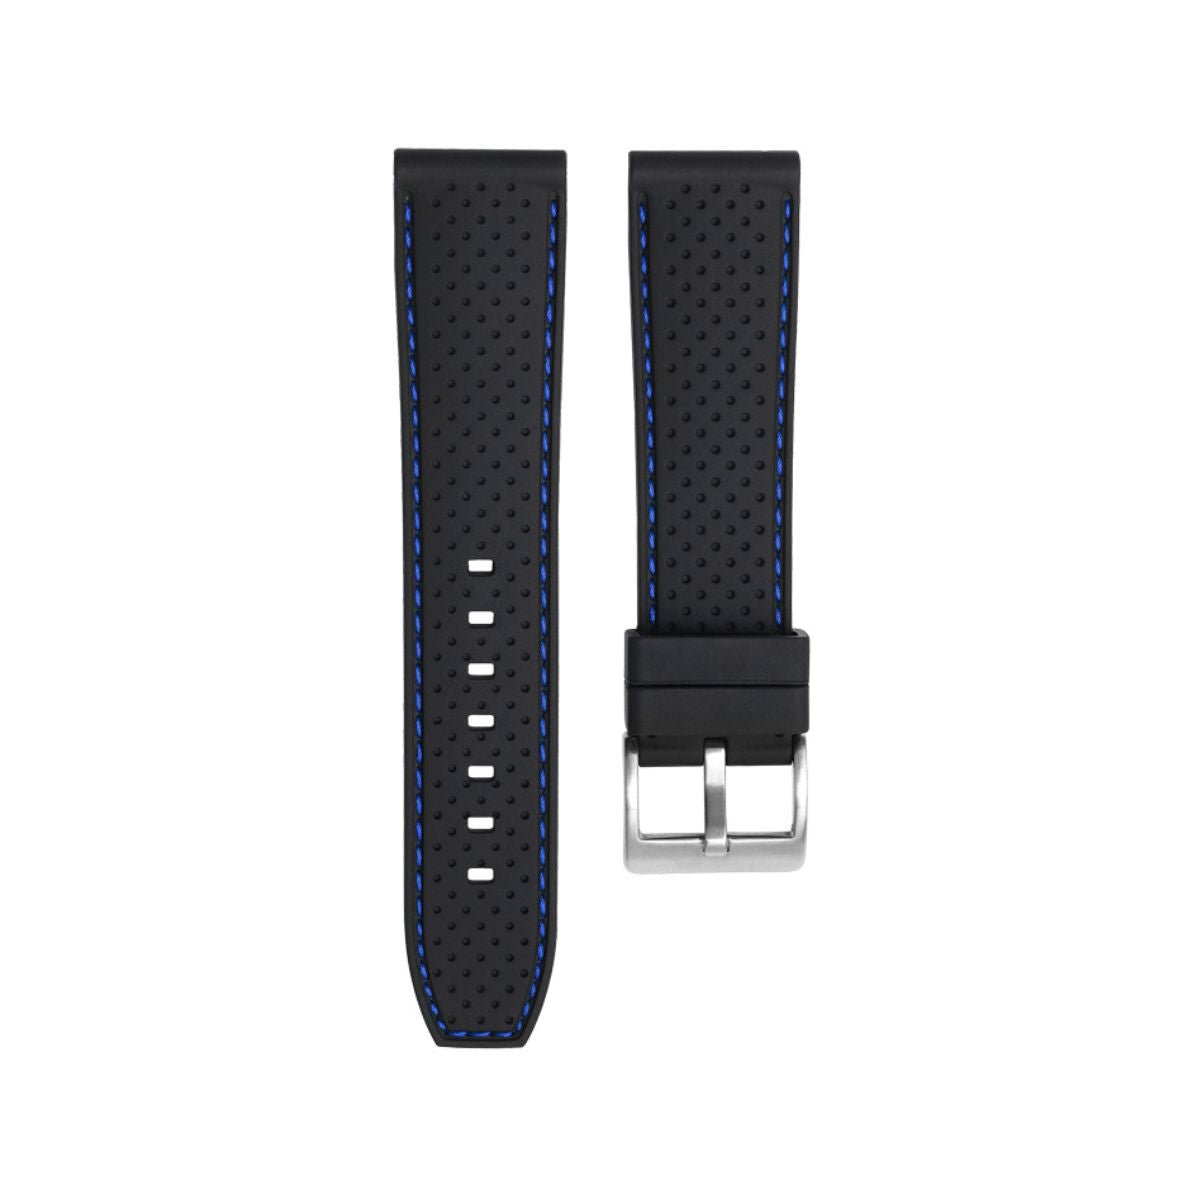 Perforated Stitch Soft Silicone Strap - Quick-Release - Black with Blue Stitch -StrapSeeker